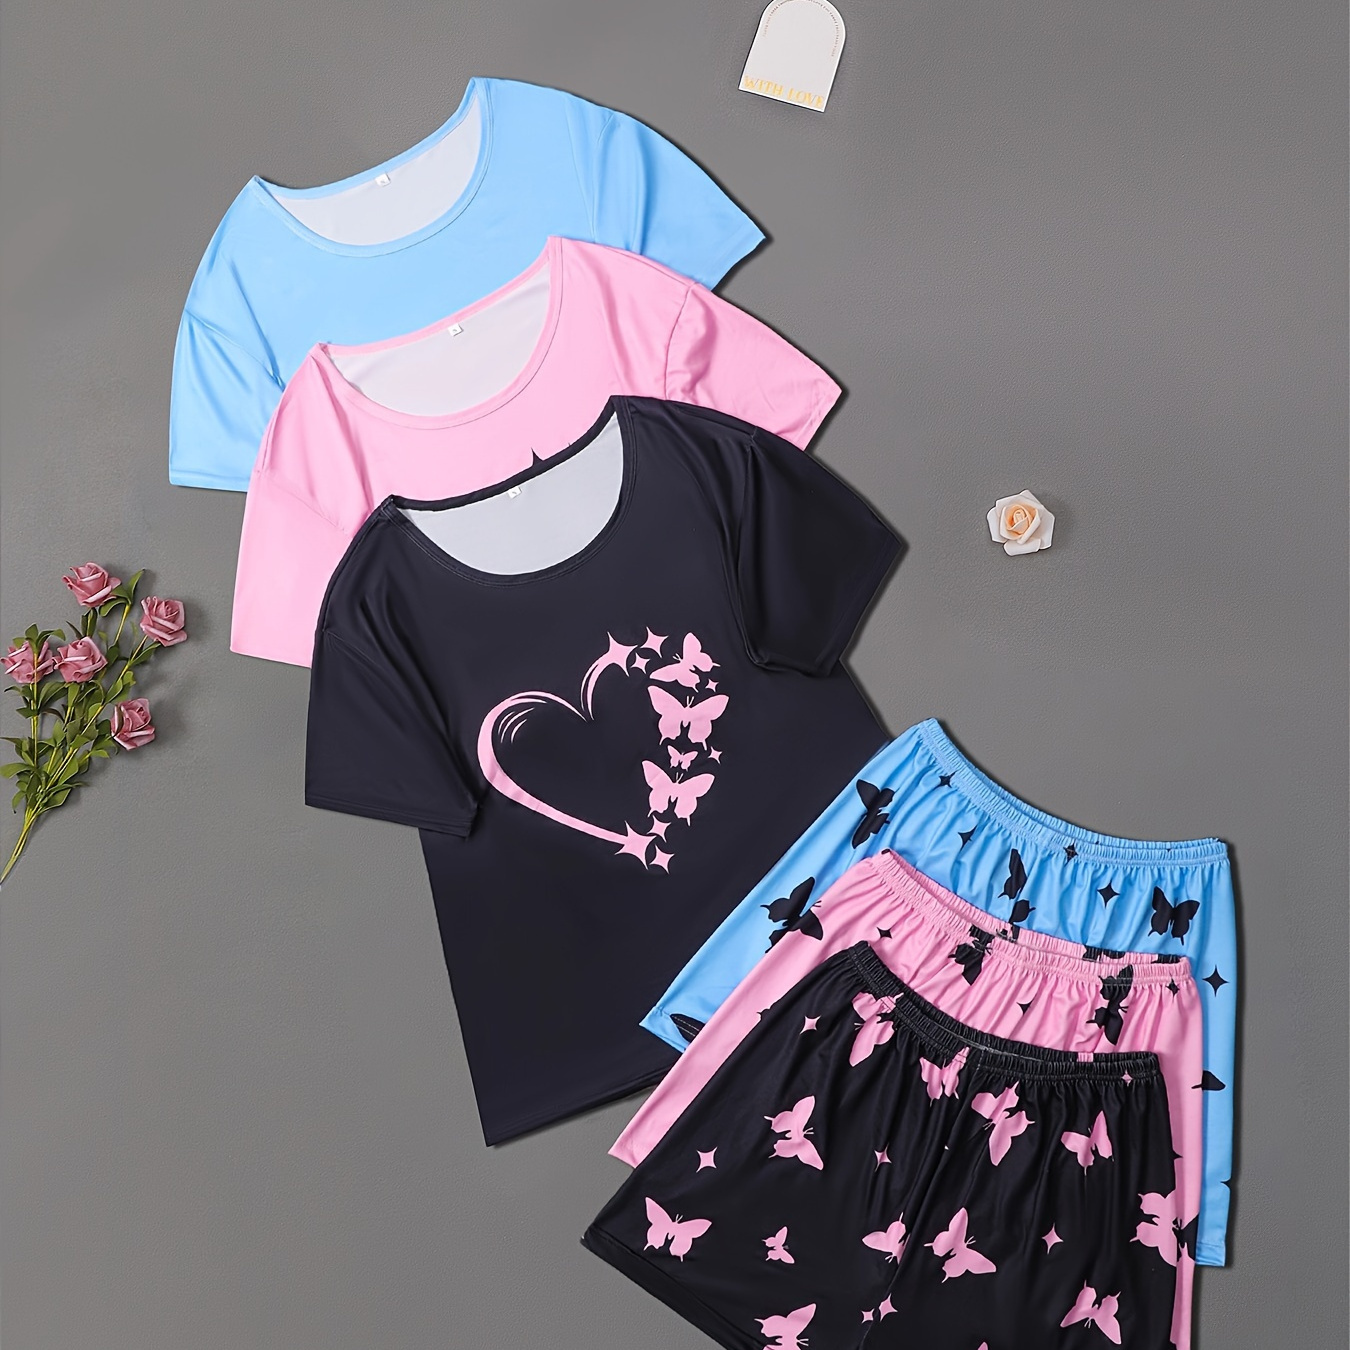 

3 Sets Women's Heart & Butterfly Print Casual Pajama Set, Short Sleeve Round Neck Top & Shorts, Comfortable Relaxed Fit